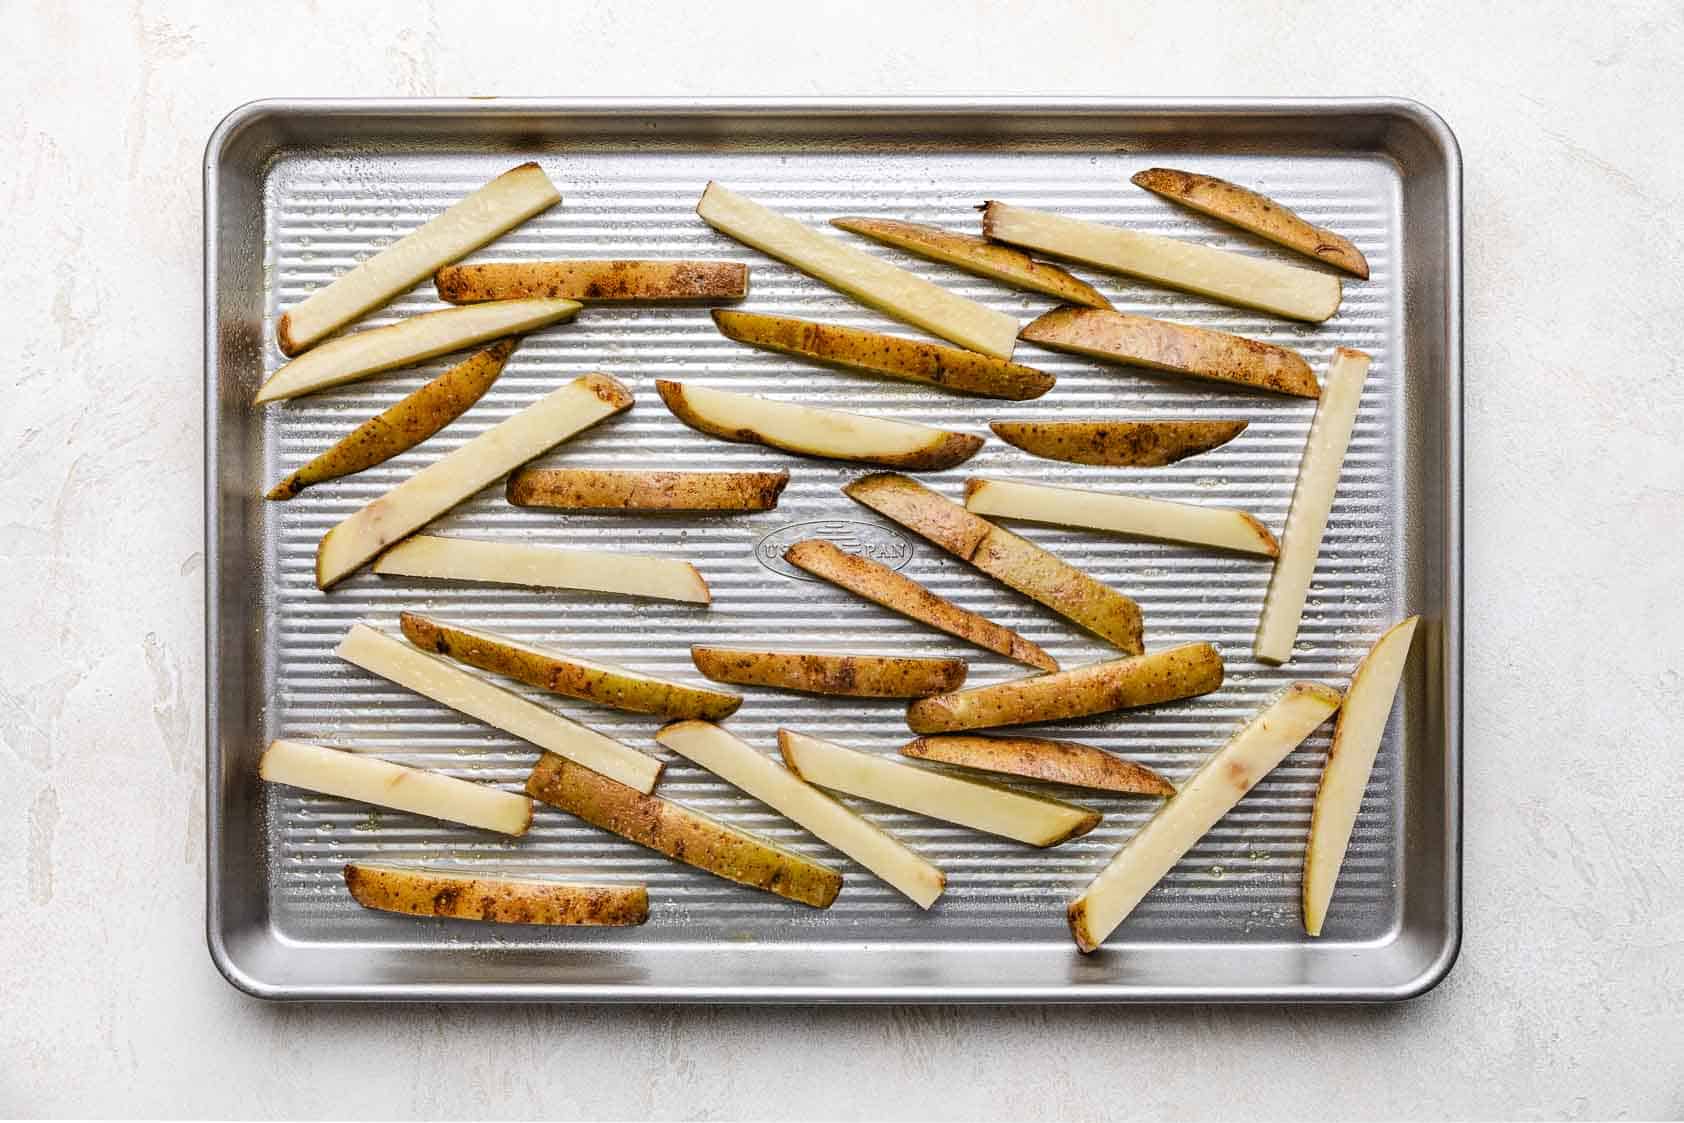 Large sheet pan filled with unbaked fries.